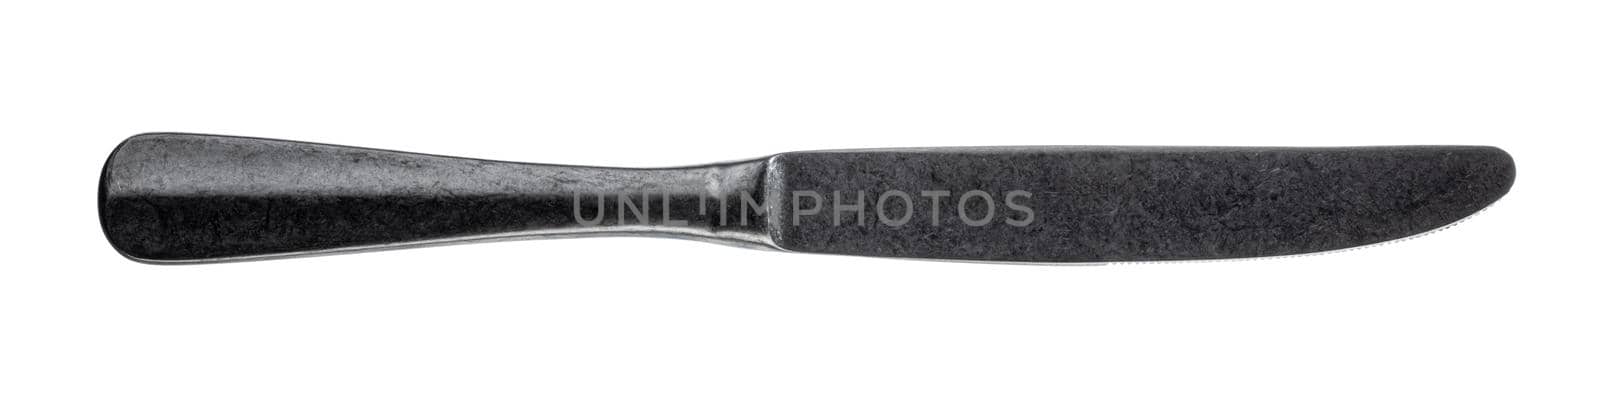 Silver knife isolated on white background close up by Fabrikasimf